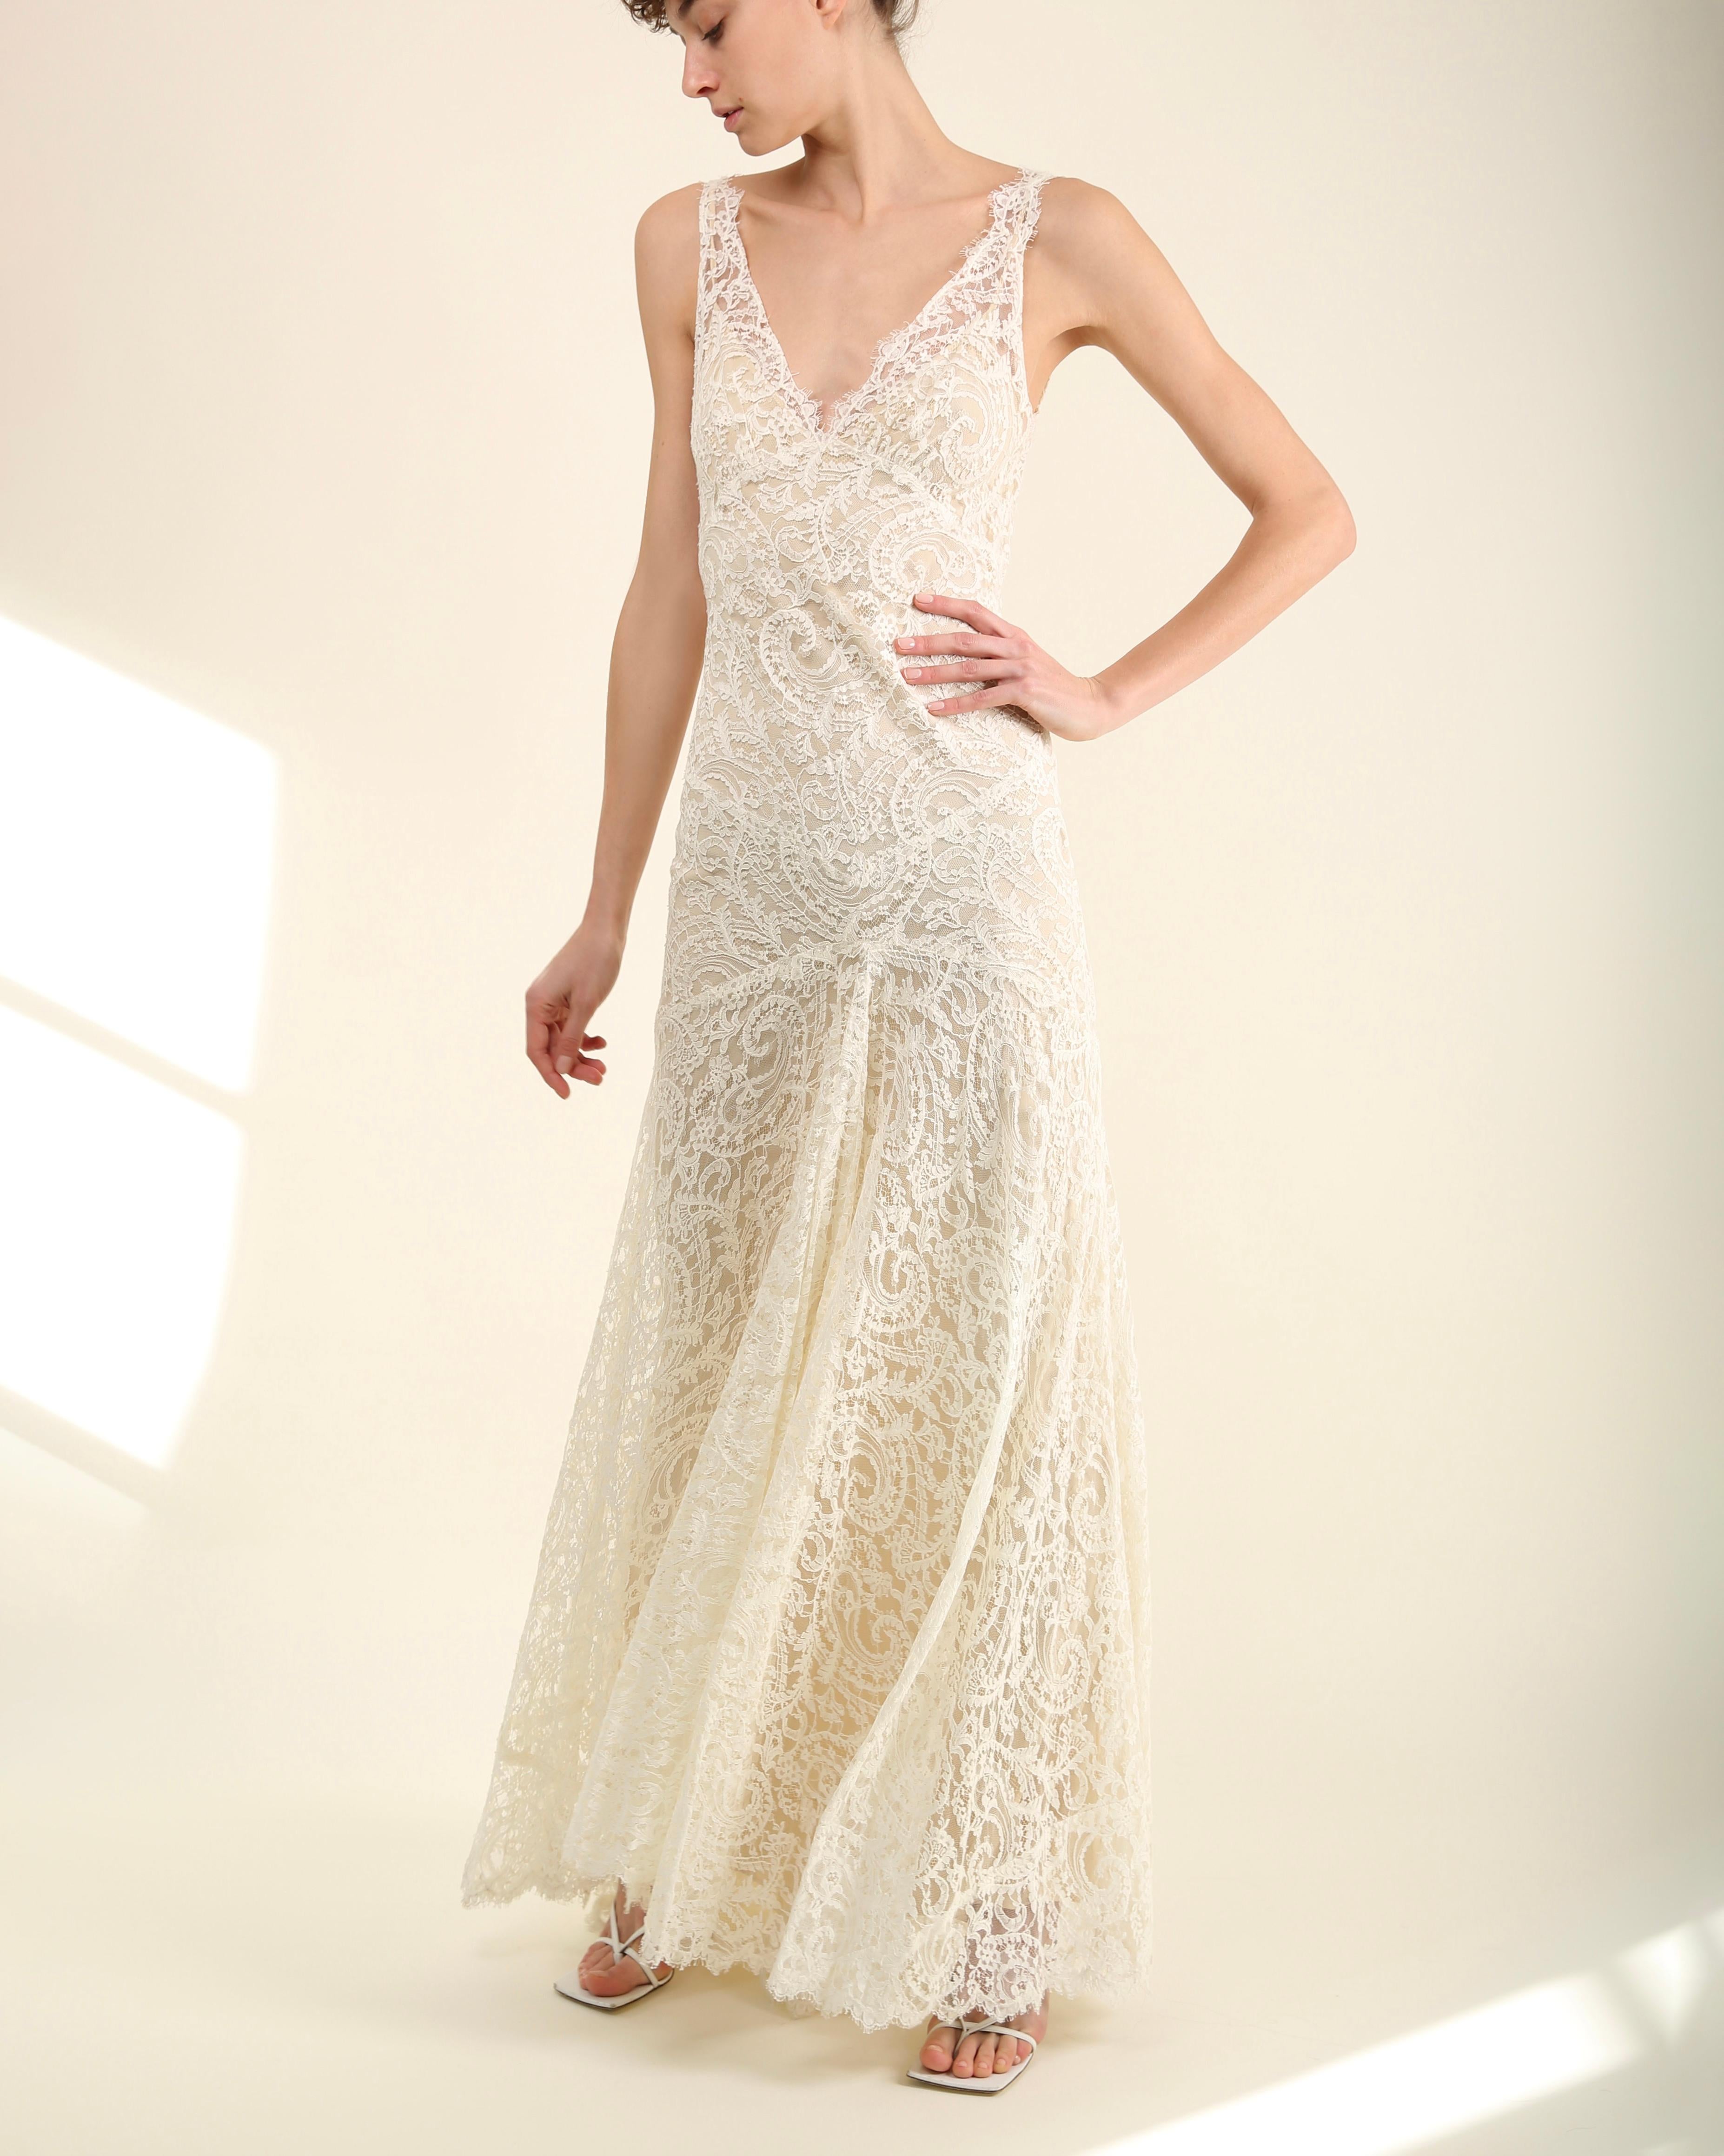 Monique Lhuillier ivory lace plunging backless wedding gown with train dress  14